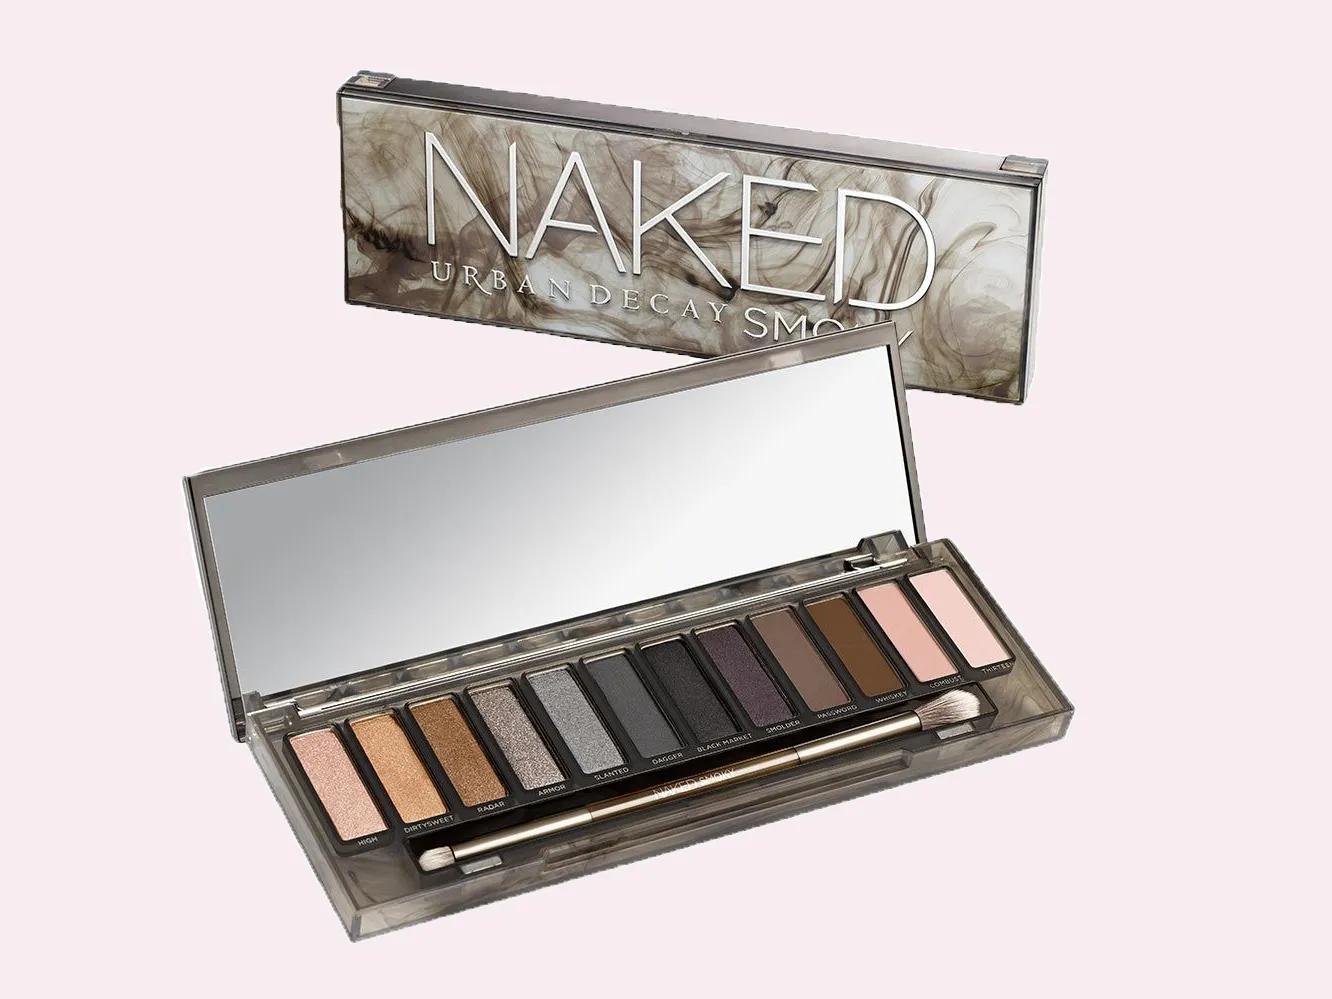 urban decay smoked eyeshadow palette - Which eyeshadow is best for smokey eyes